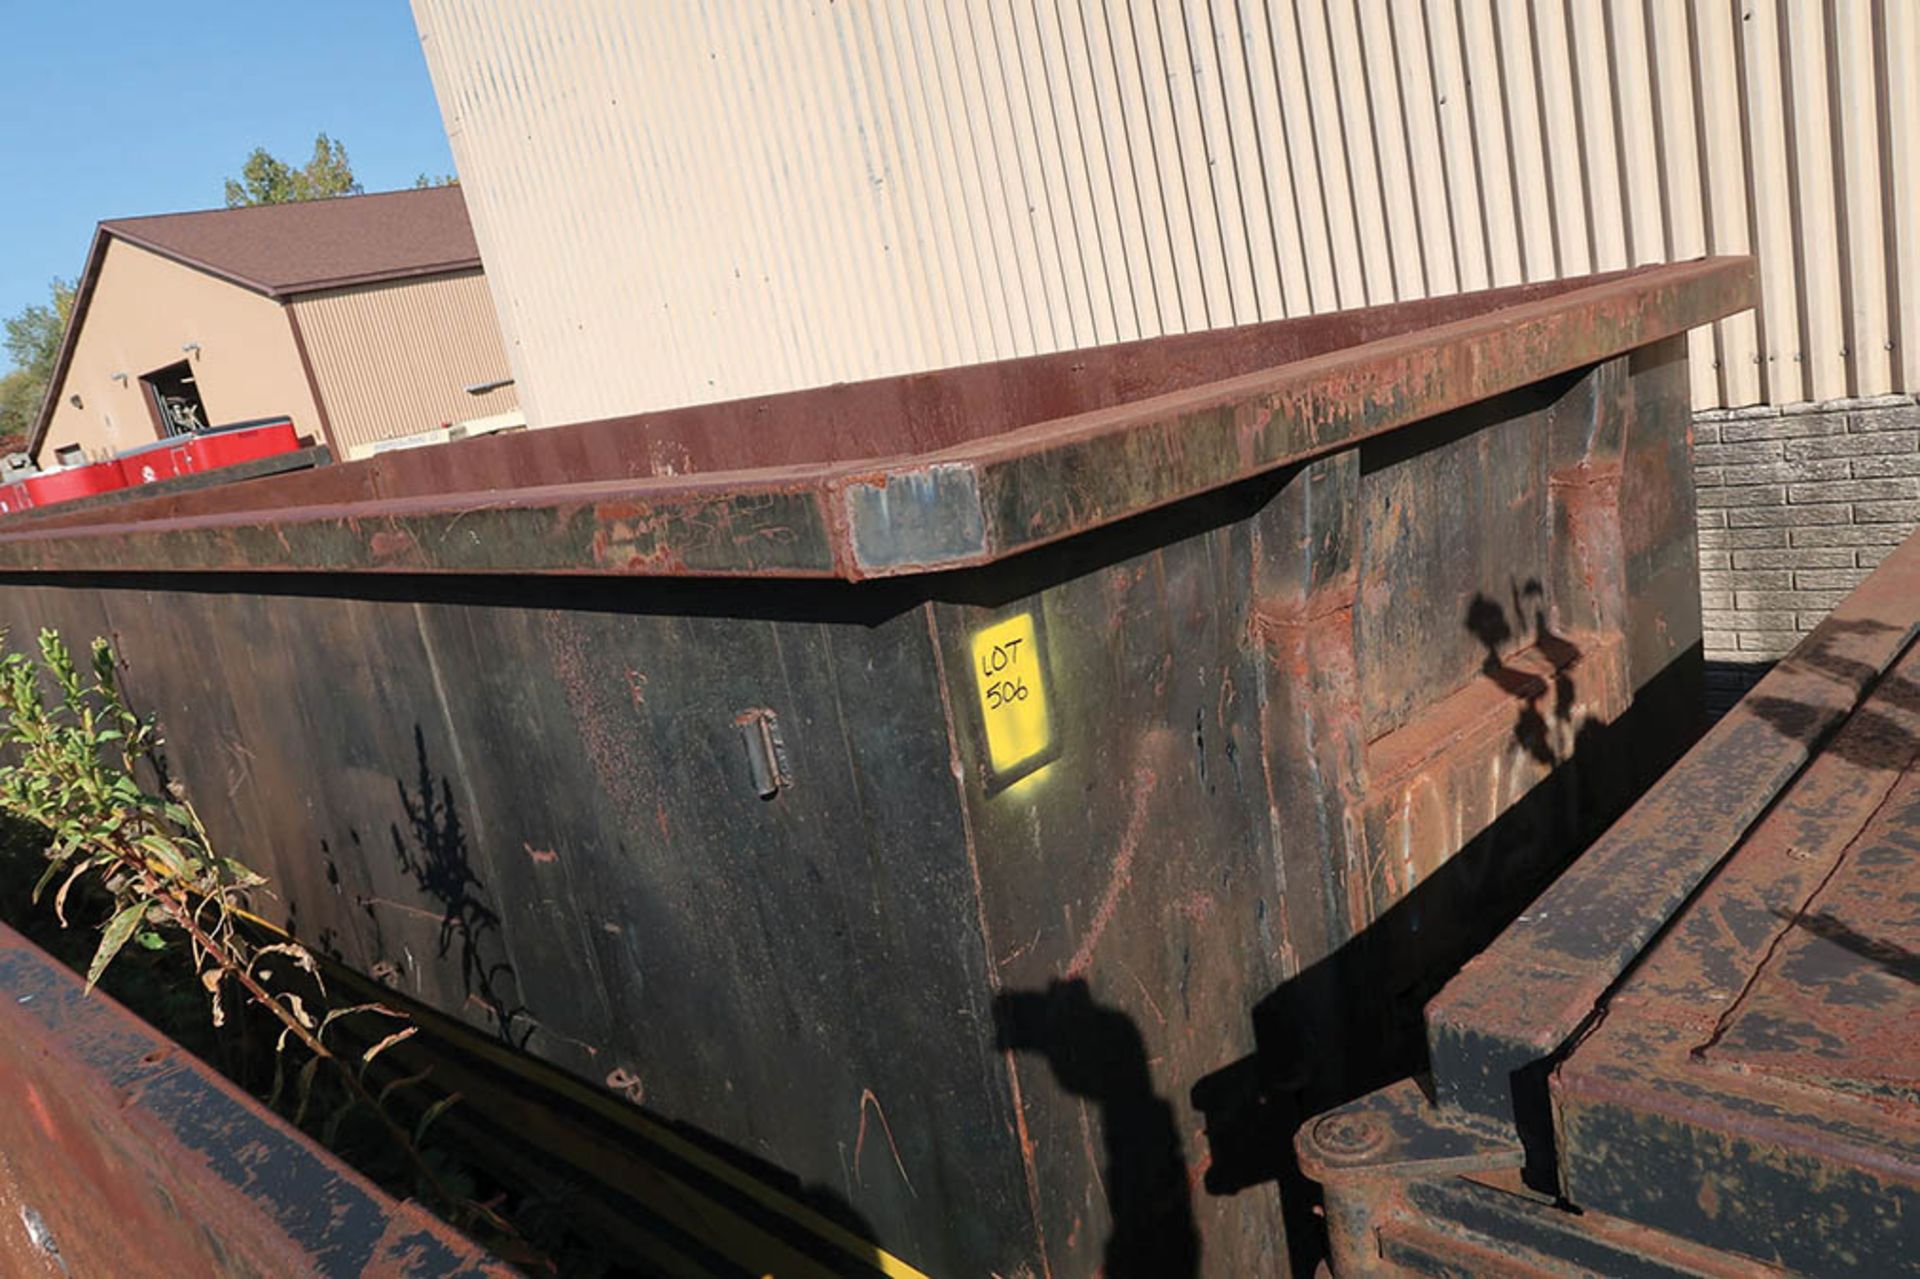 35 CU. YARD ROLL-OFF CONTAINER, RB66 ***LOCATED IN MIDLAND, MICHIGAN**